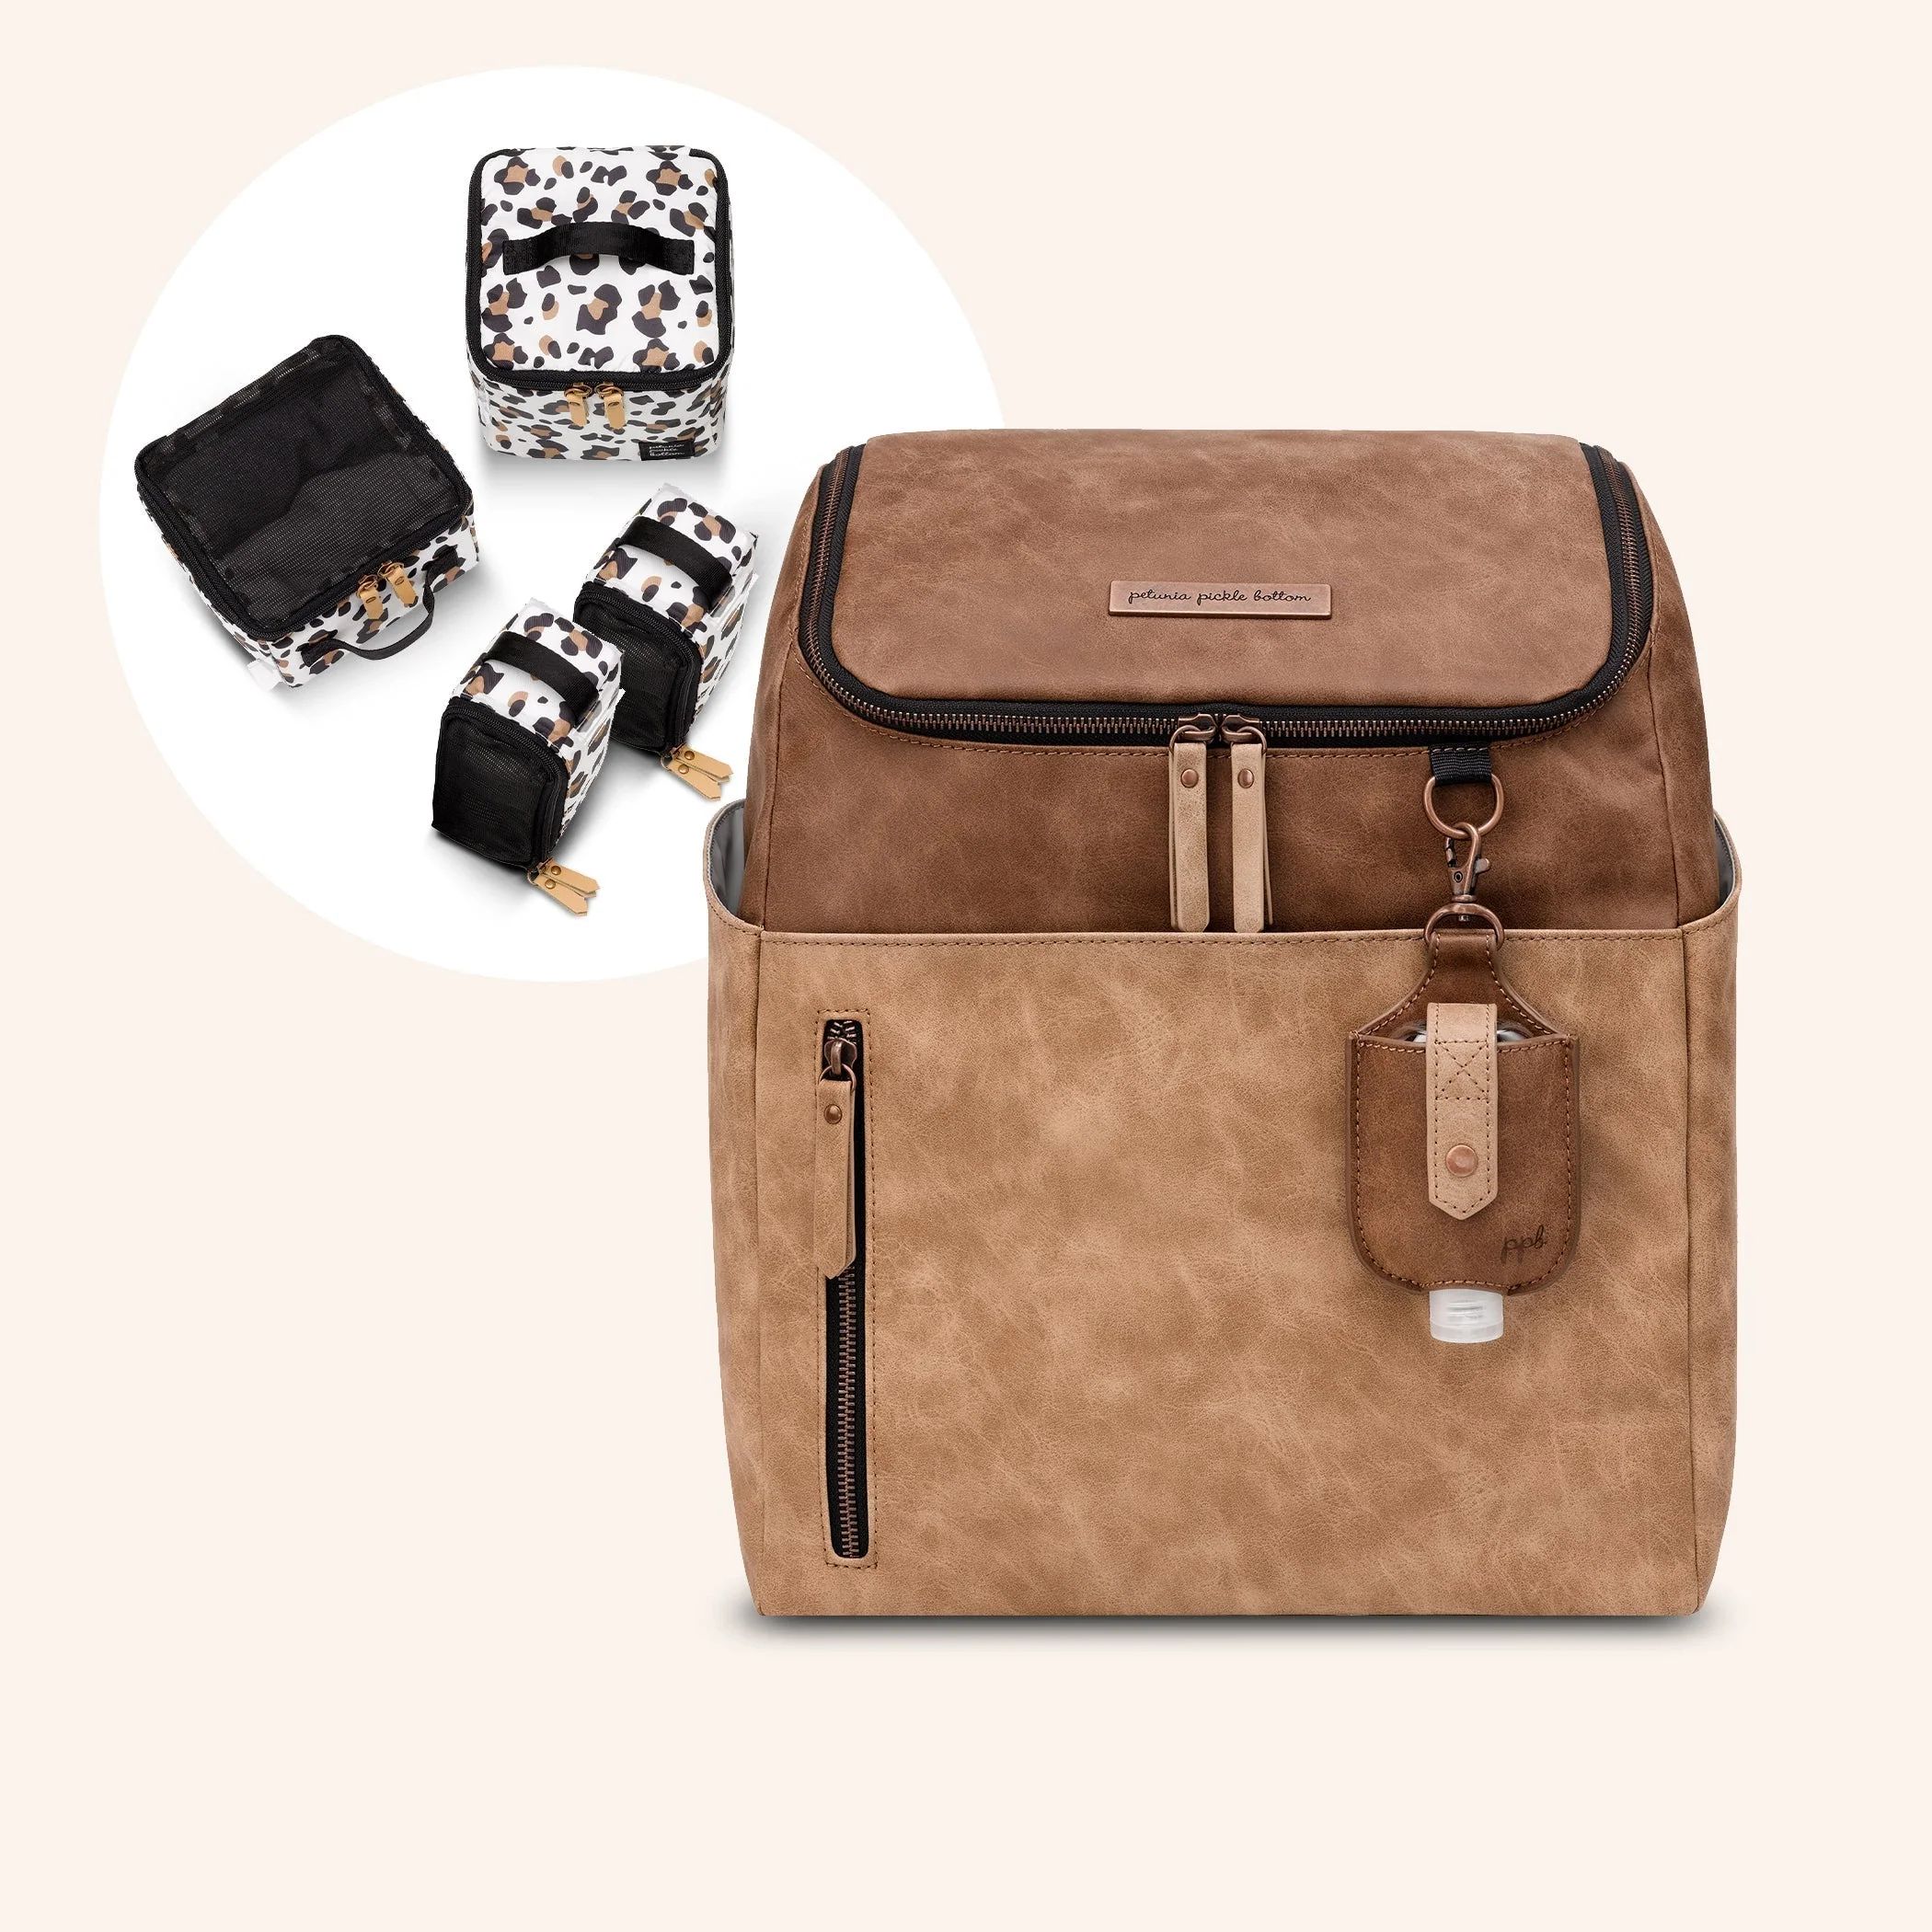 Tempo Backpack in Brioche & Packing Cube Set Bundle | Petunia Pickle Bottom